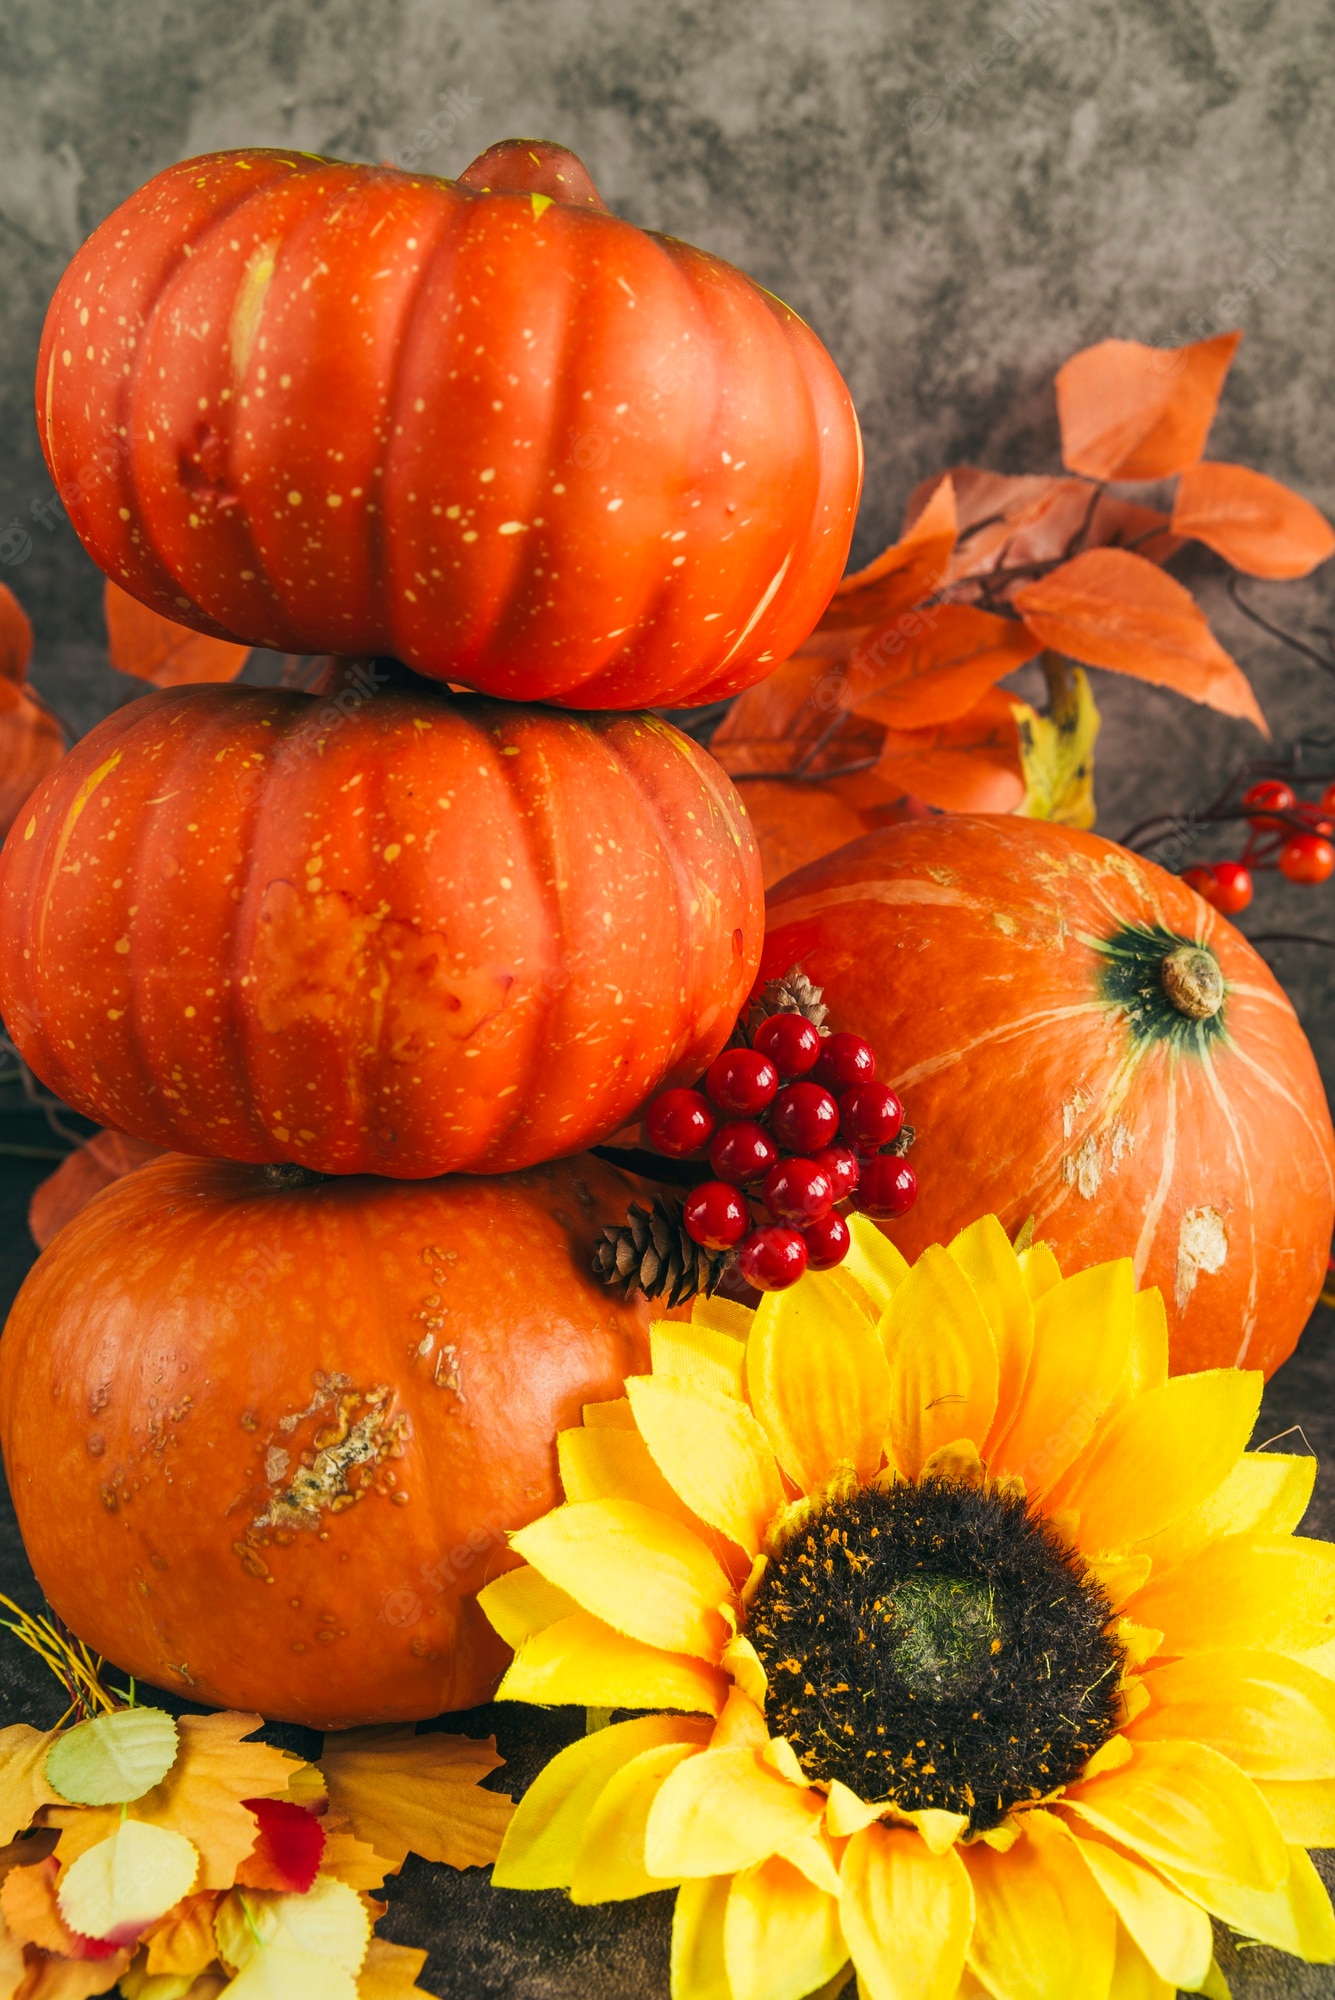 Fall Pictures With Pumpkins And Sunflowers Wallpapers